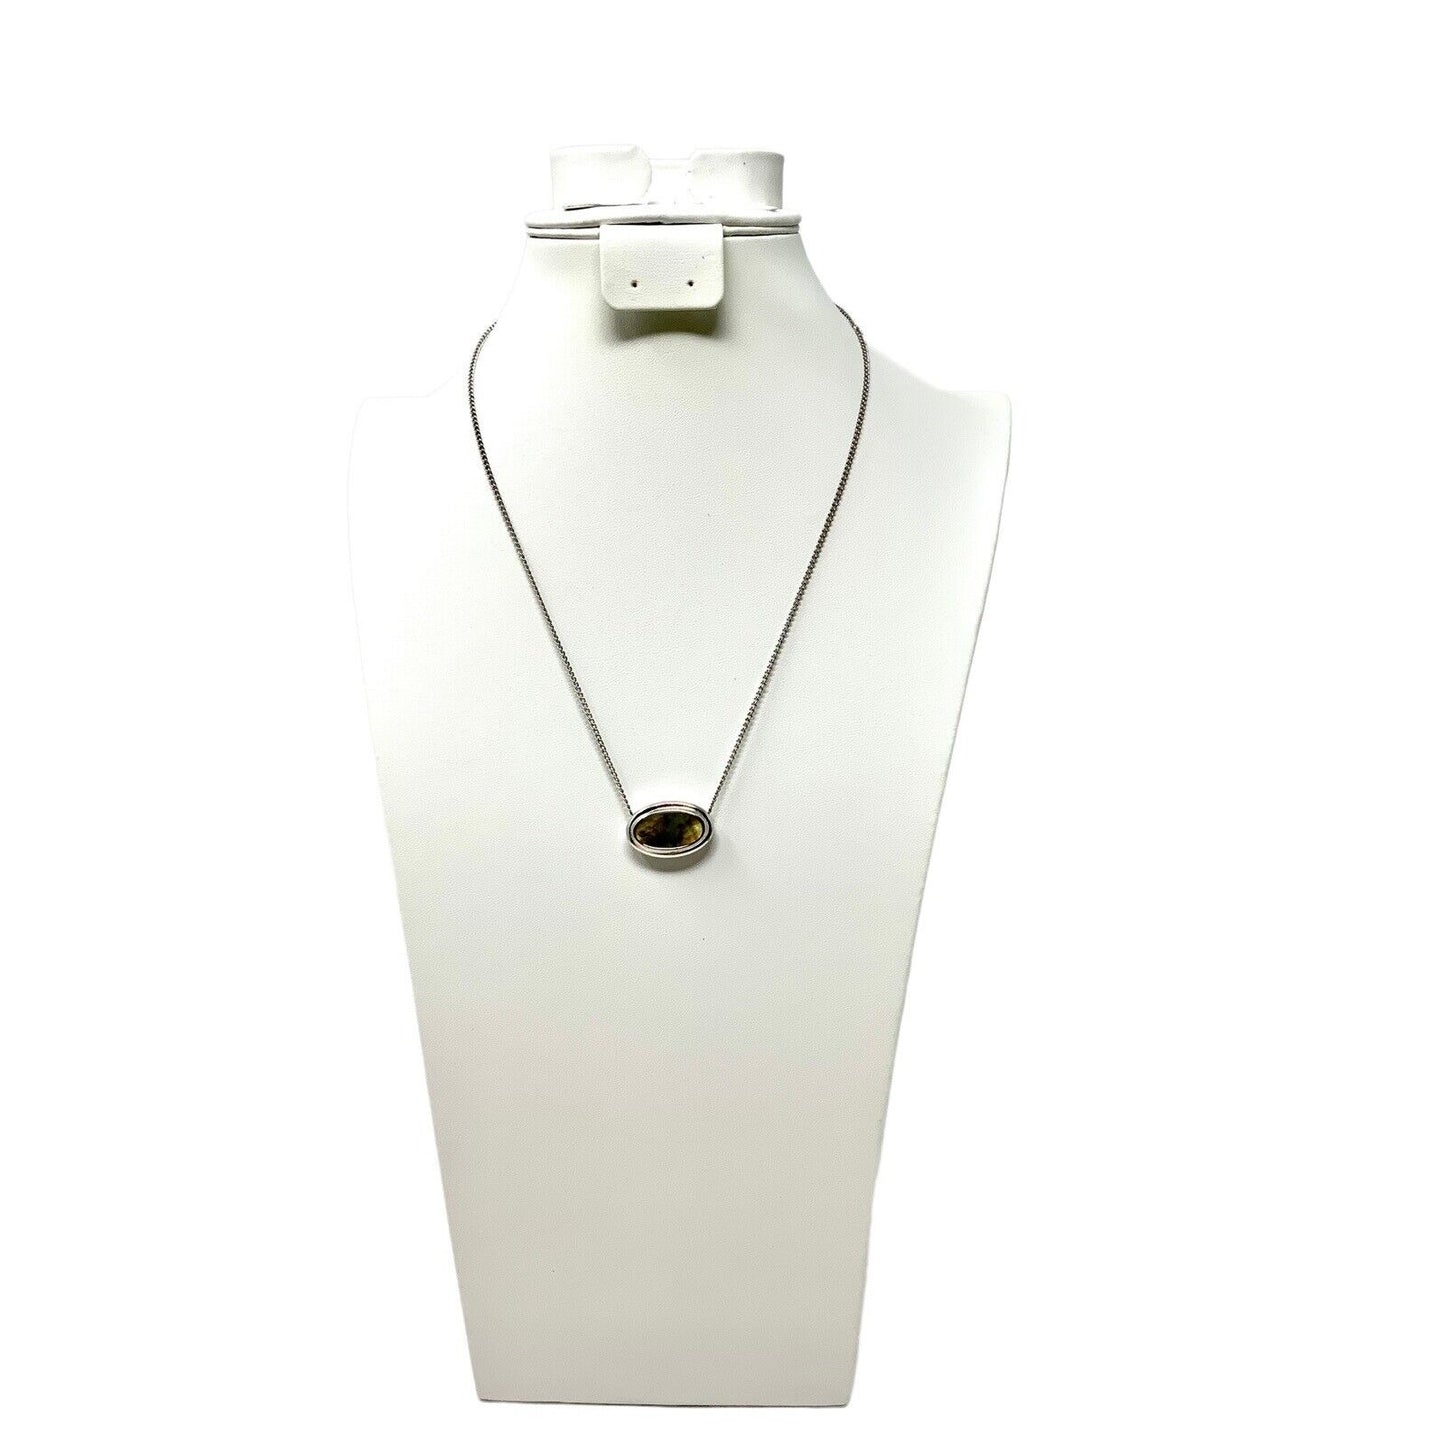 Mosaic Silver-Tone Pendant and Necklace from Avon